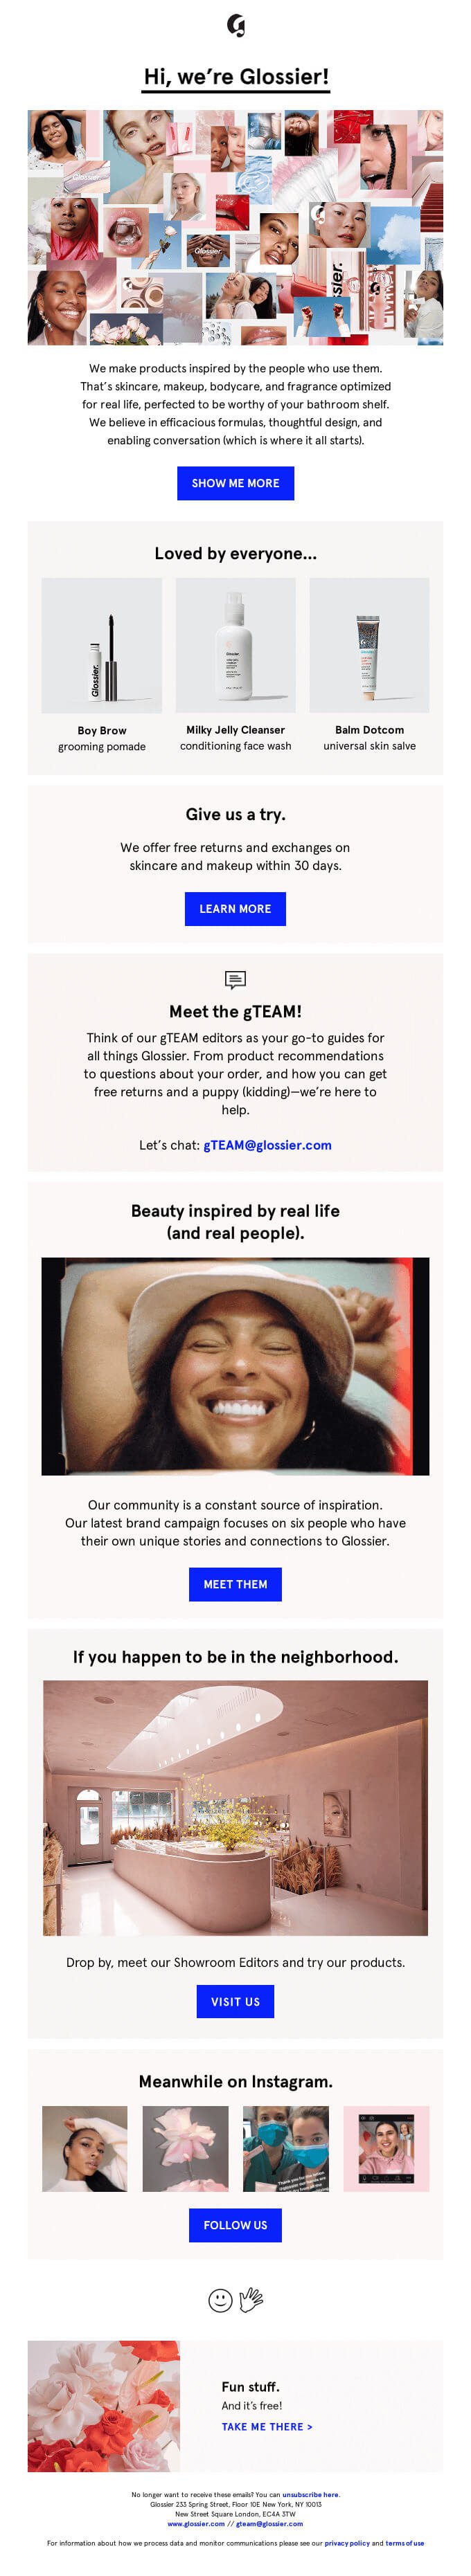 Glossier-welcome-email